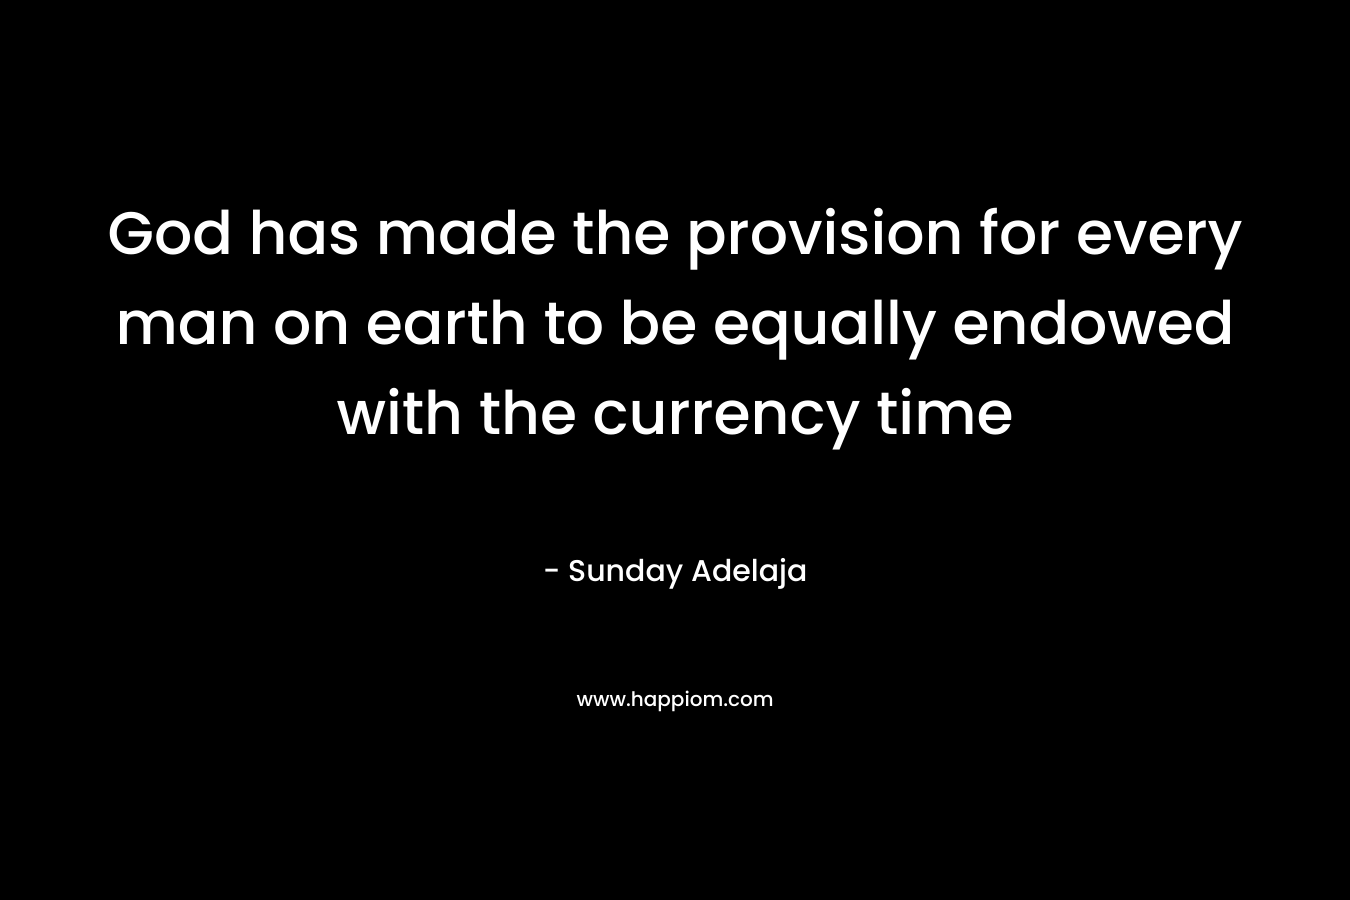 God has made the provision for every man on earth to be equally endowed with the currency time